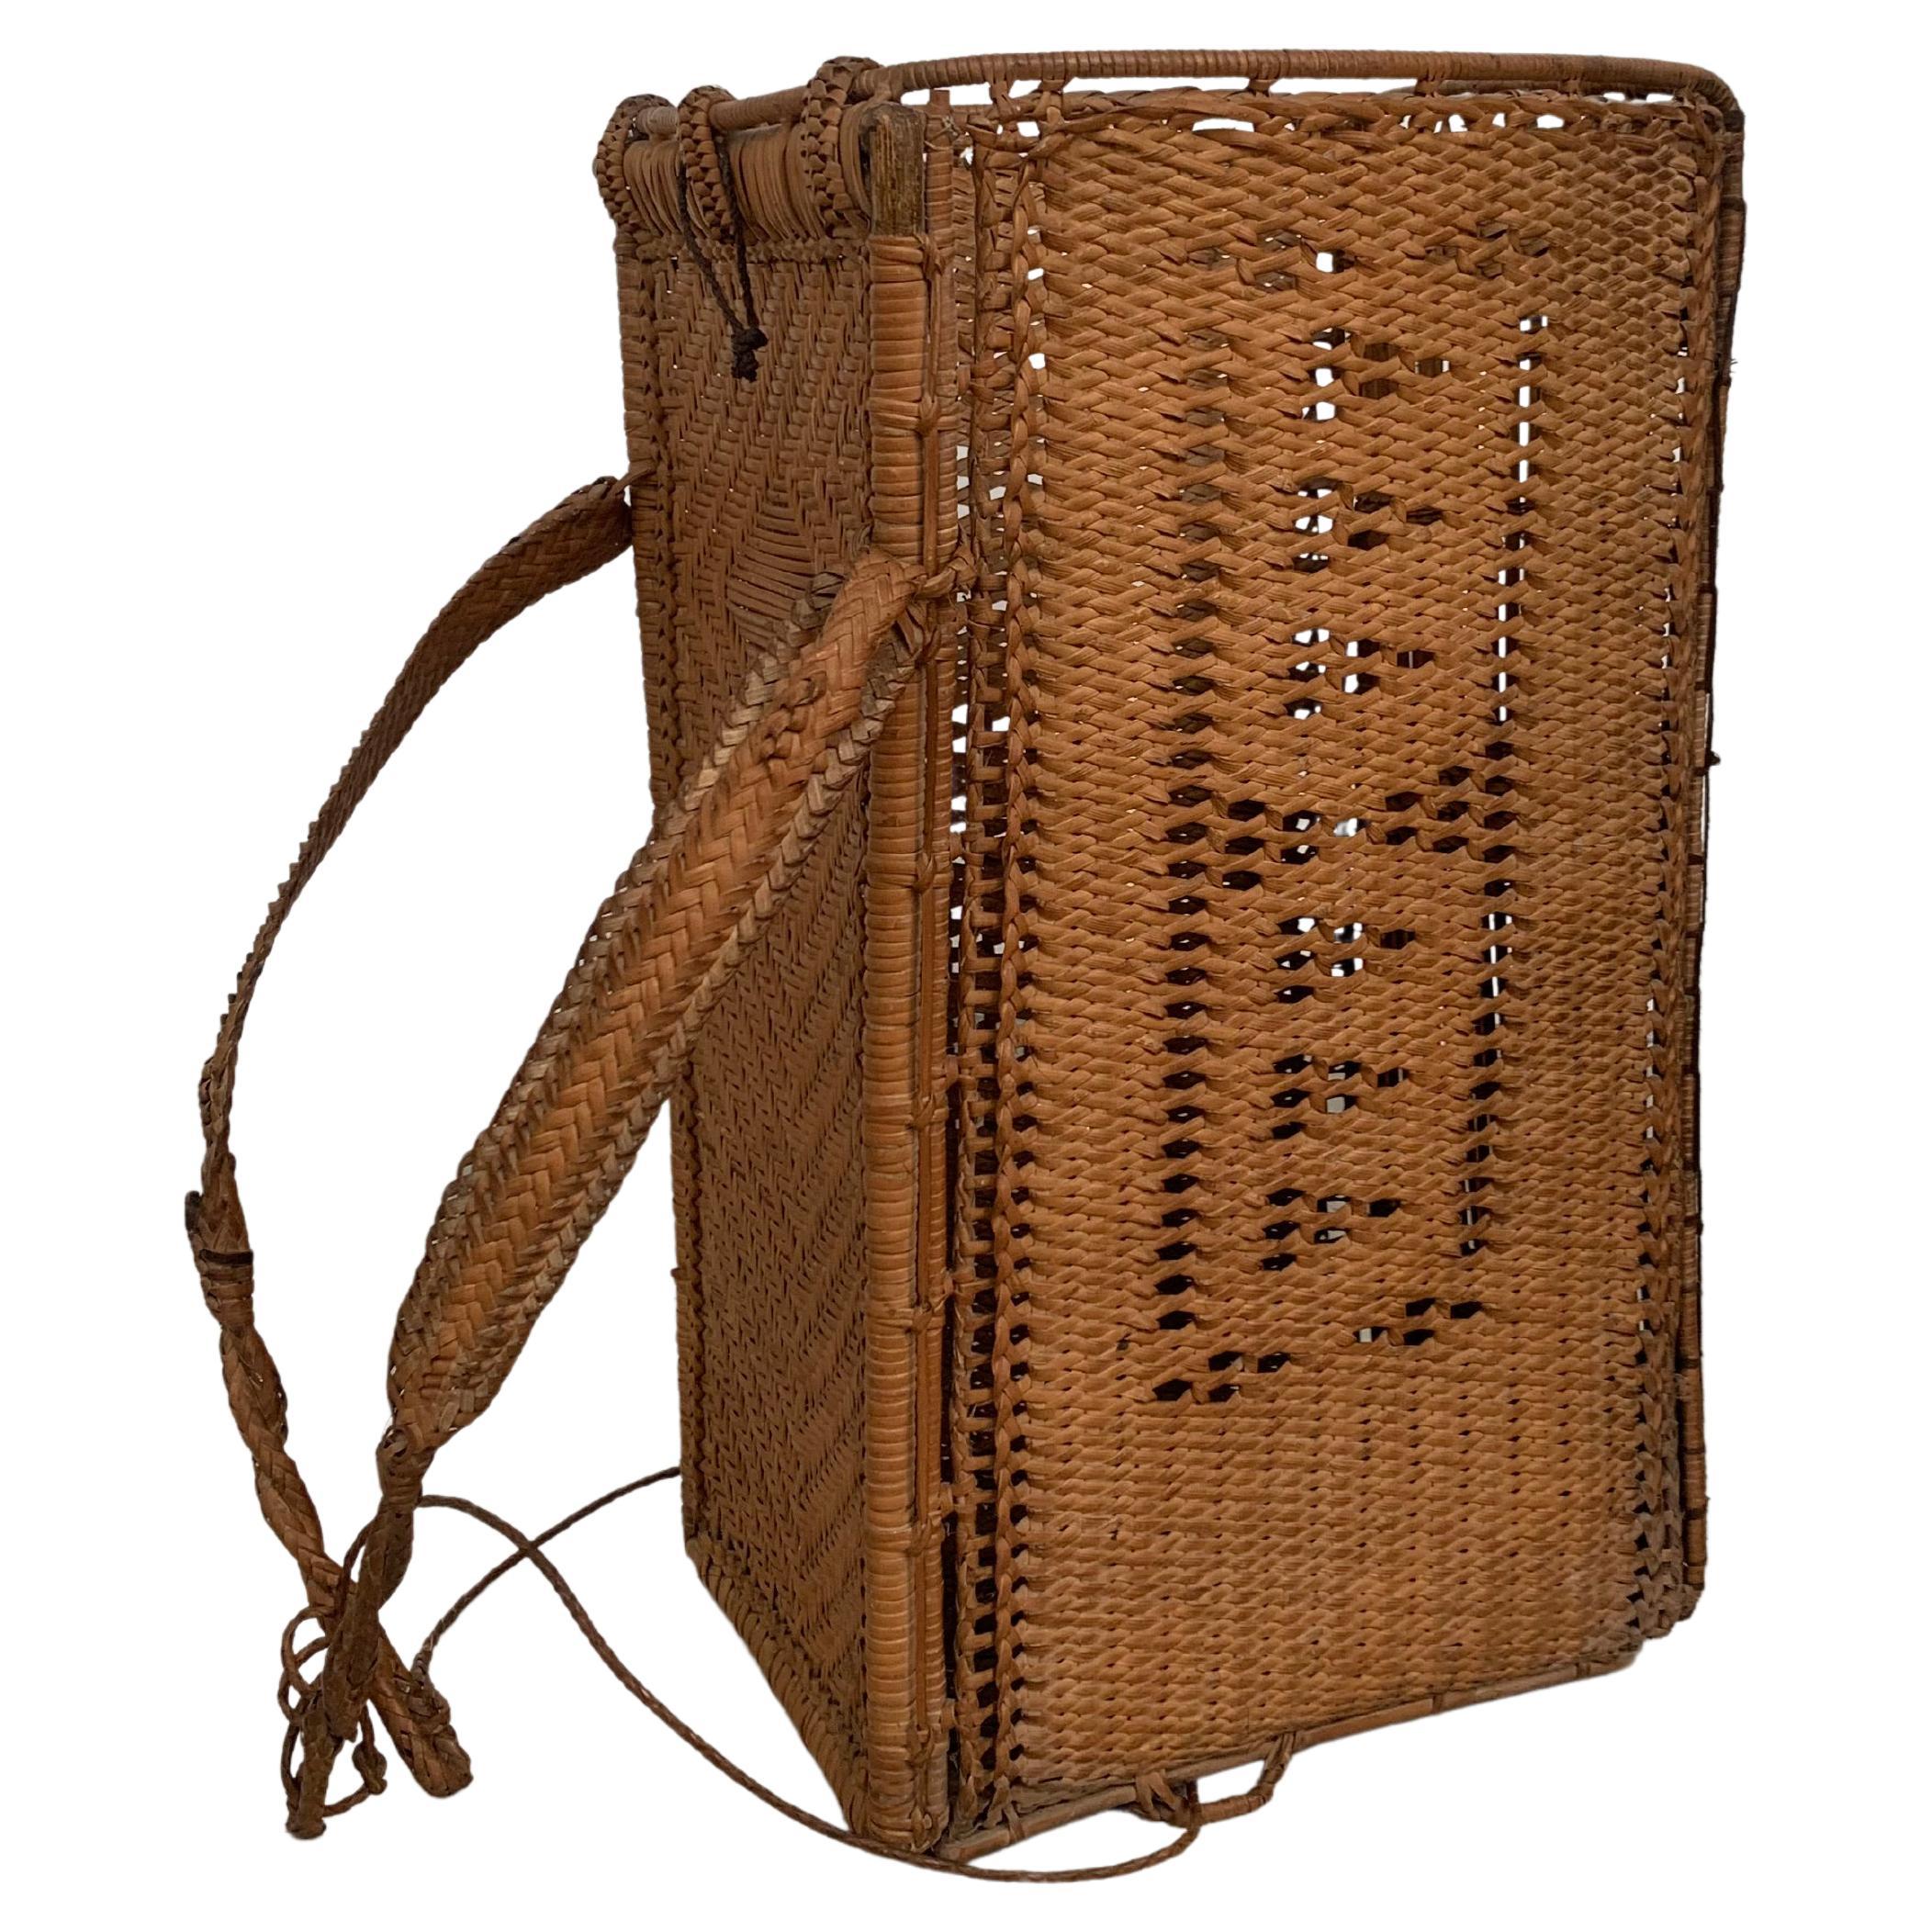 Rattan Basket Dayak Tribe Hand-Woven with Straps from Kalimantan, Borneo